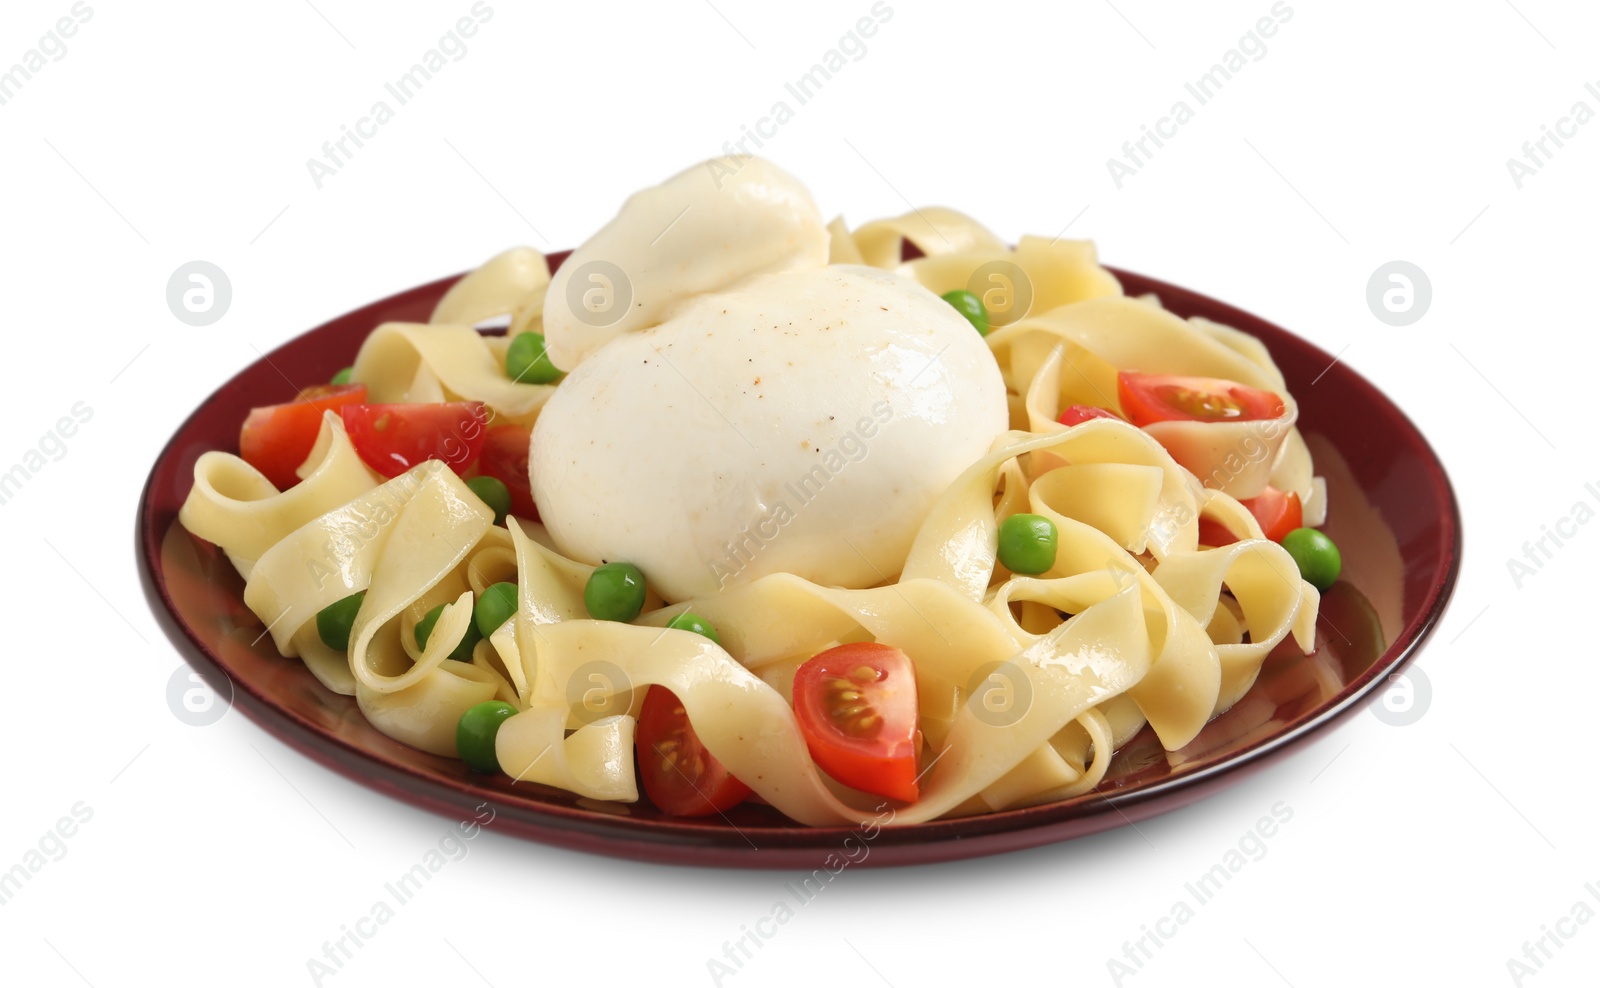 Photo of Plate of delicious pasta with burrata, peas and tomatoes isolated on white